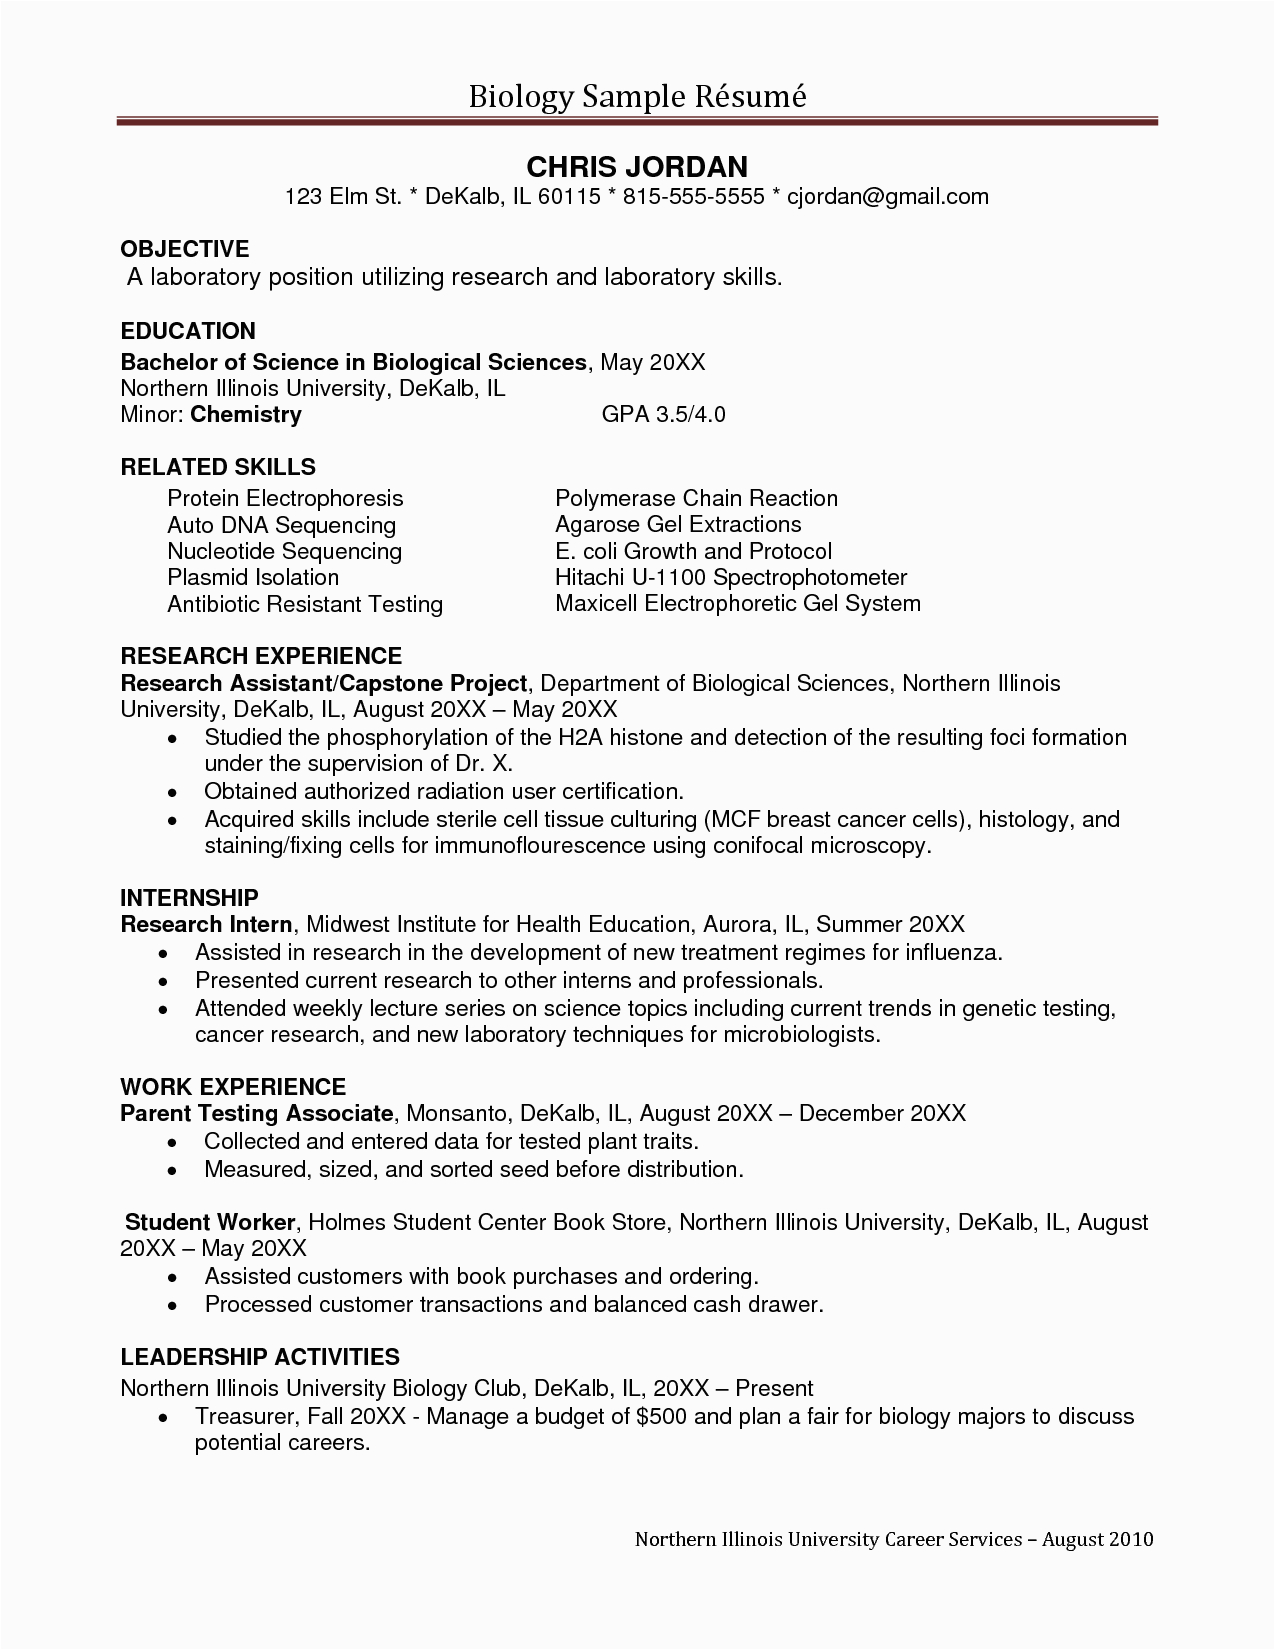 Sample Resume Objective for Research Position Pin On Resume